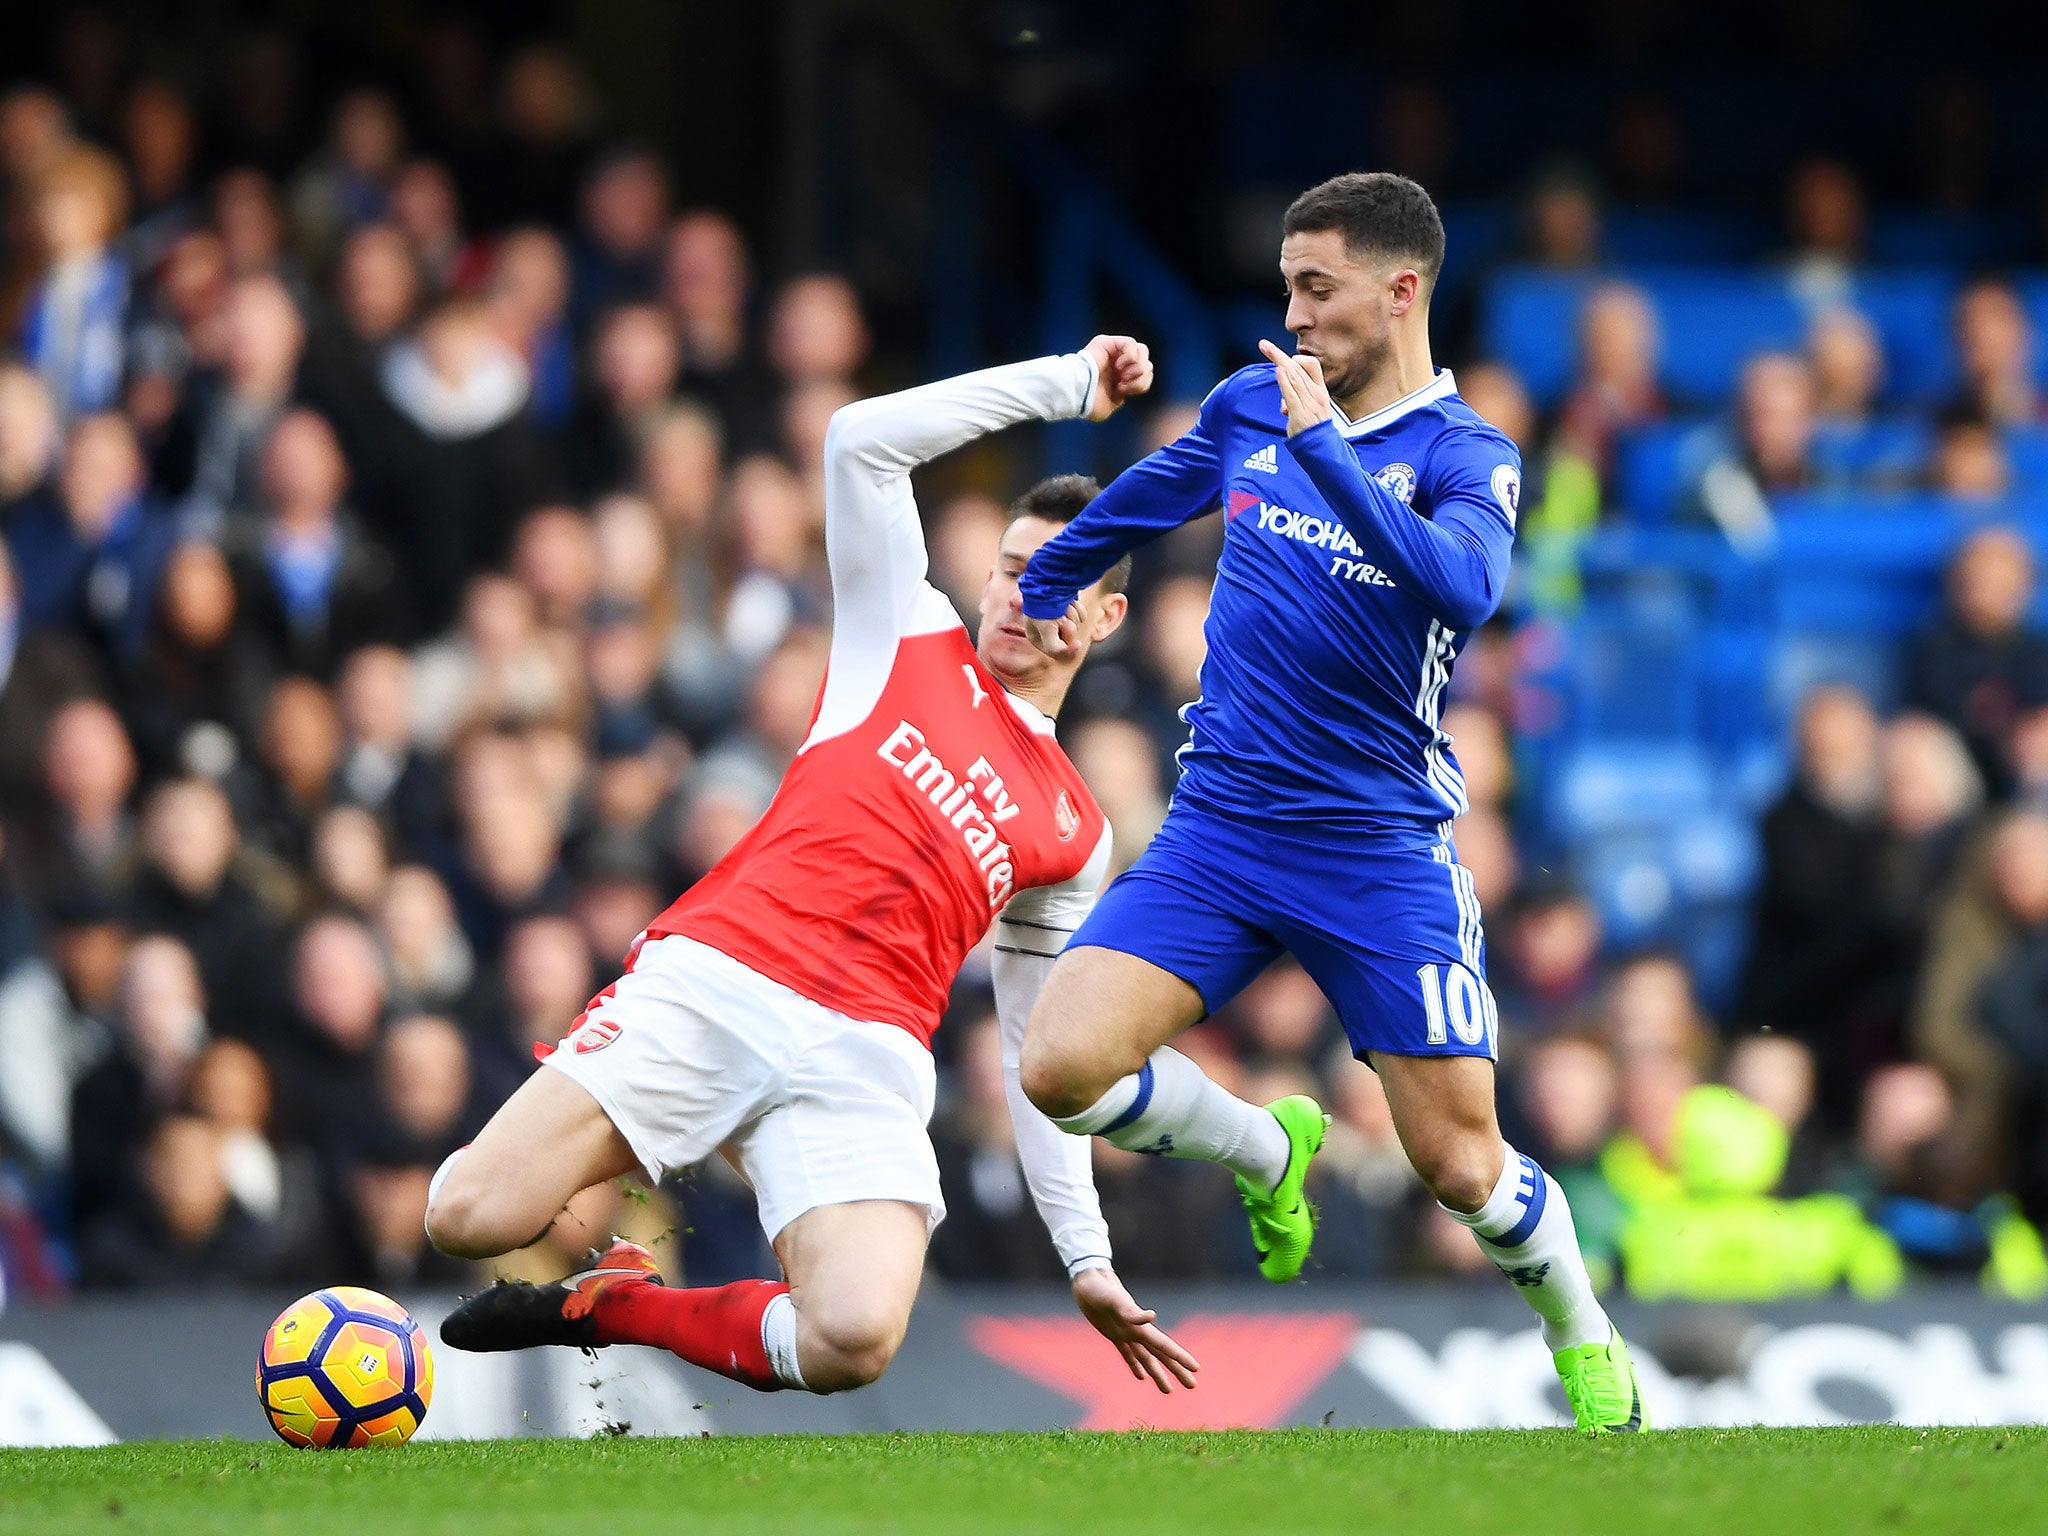 Eden Hazard attempts to take the ball past Arsenal's Laurent Koscielny during Saturday's game